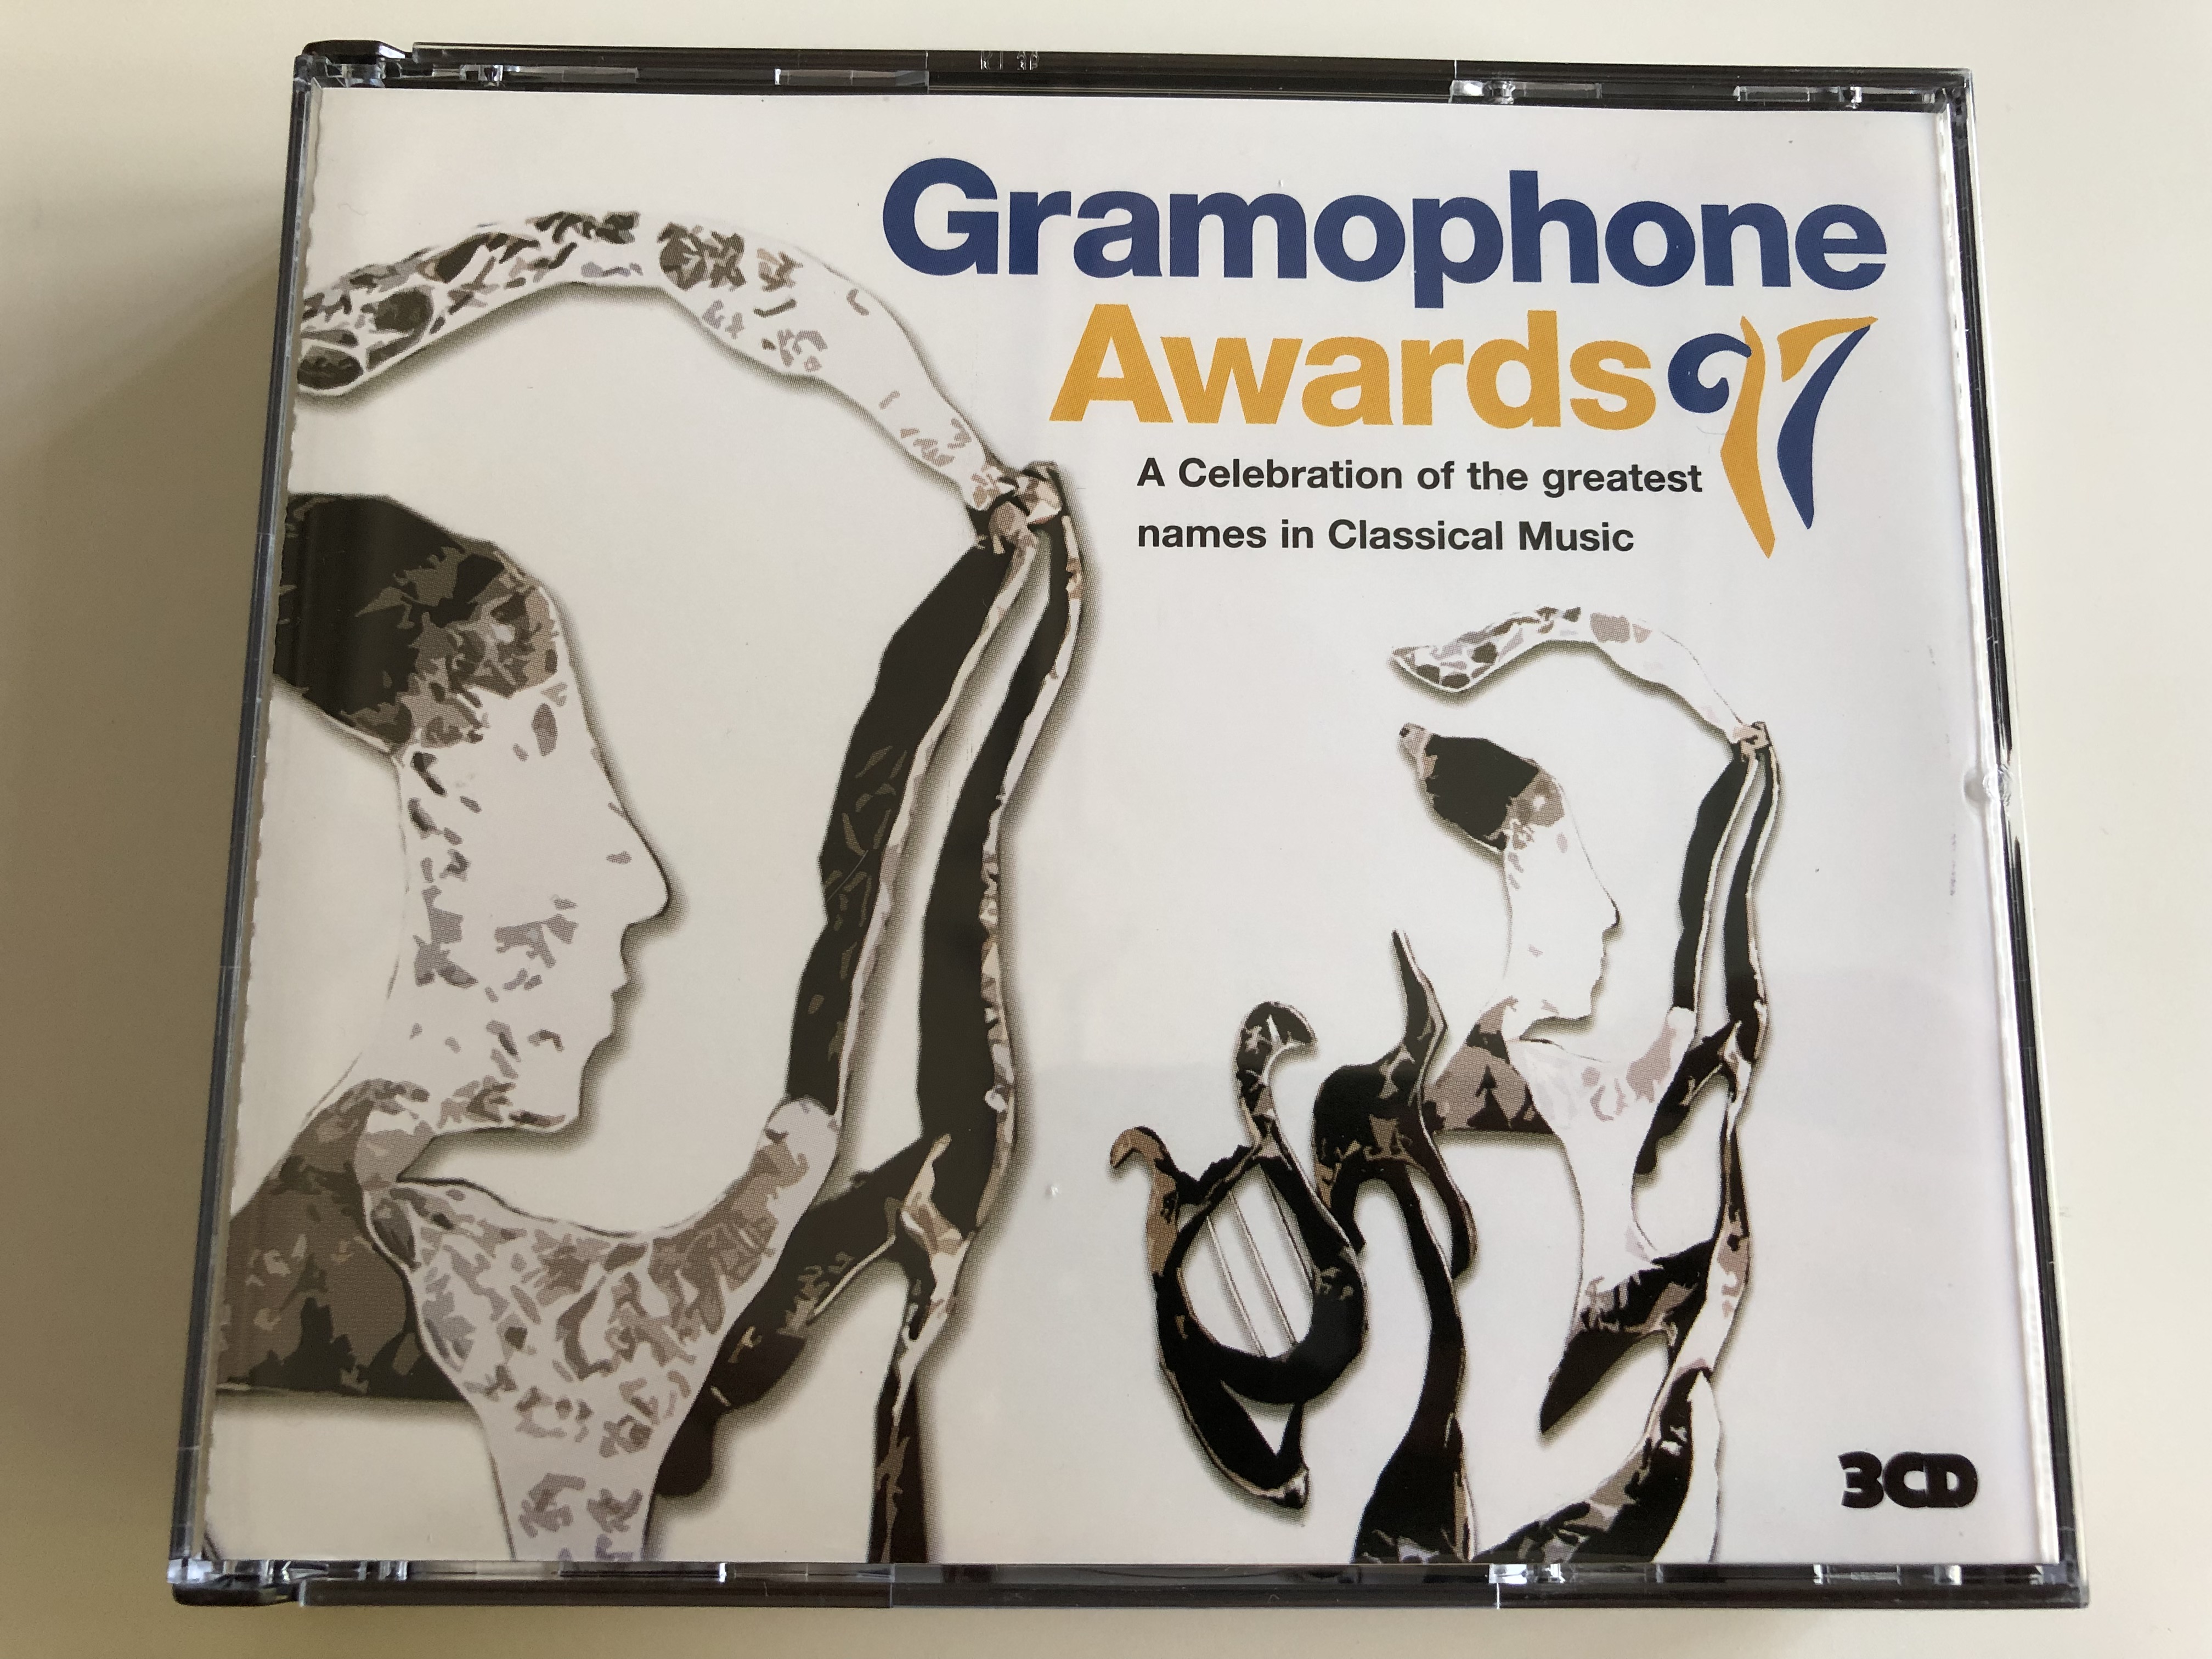 gramophone-awards-a-celebration-of-the-greatest-names-in-classical-music-audio-cd-1997-3-cd-gramcd001-1-.jpg